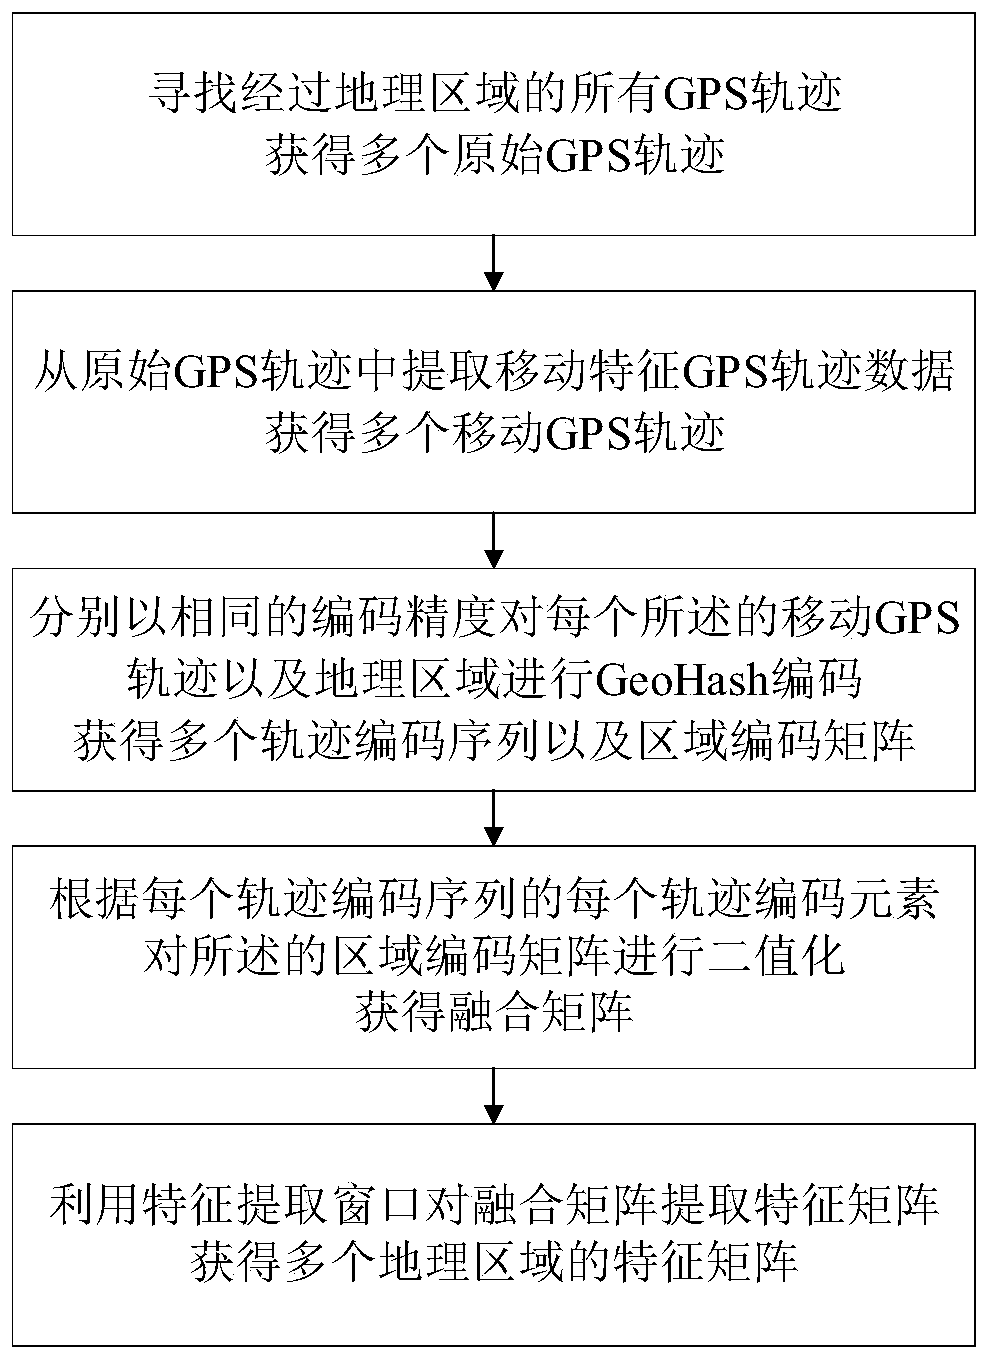 Regional feature extraction, database establishment and intersection identification method based on GPS track